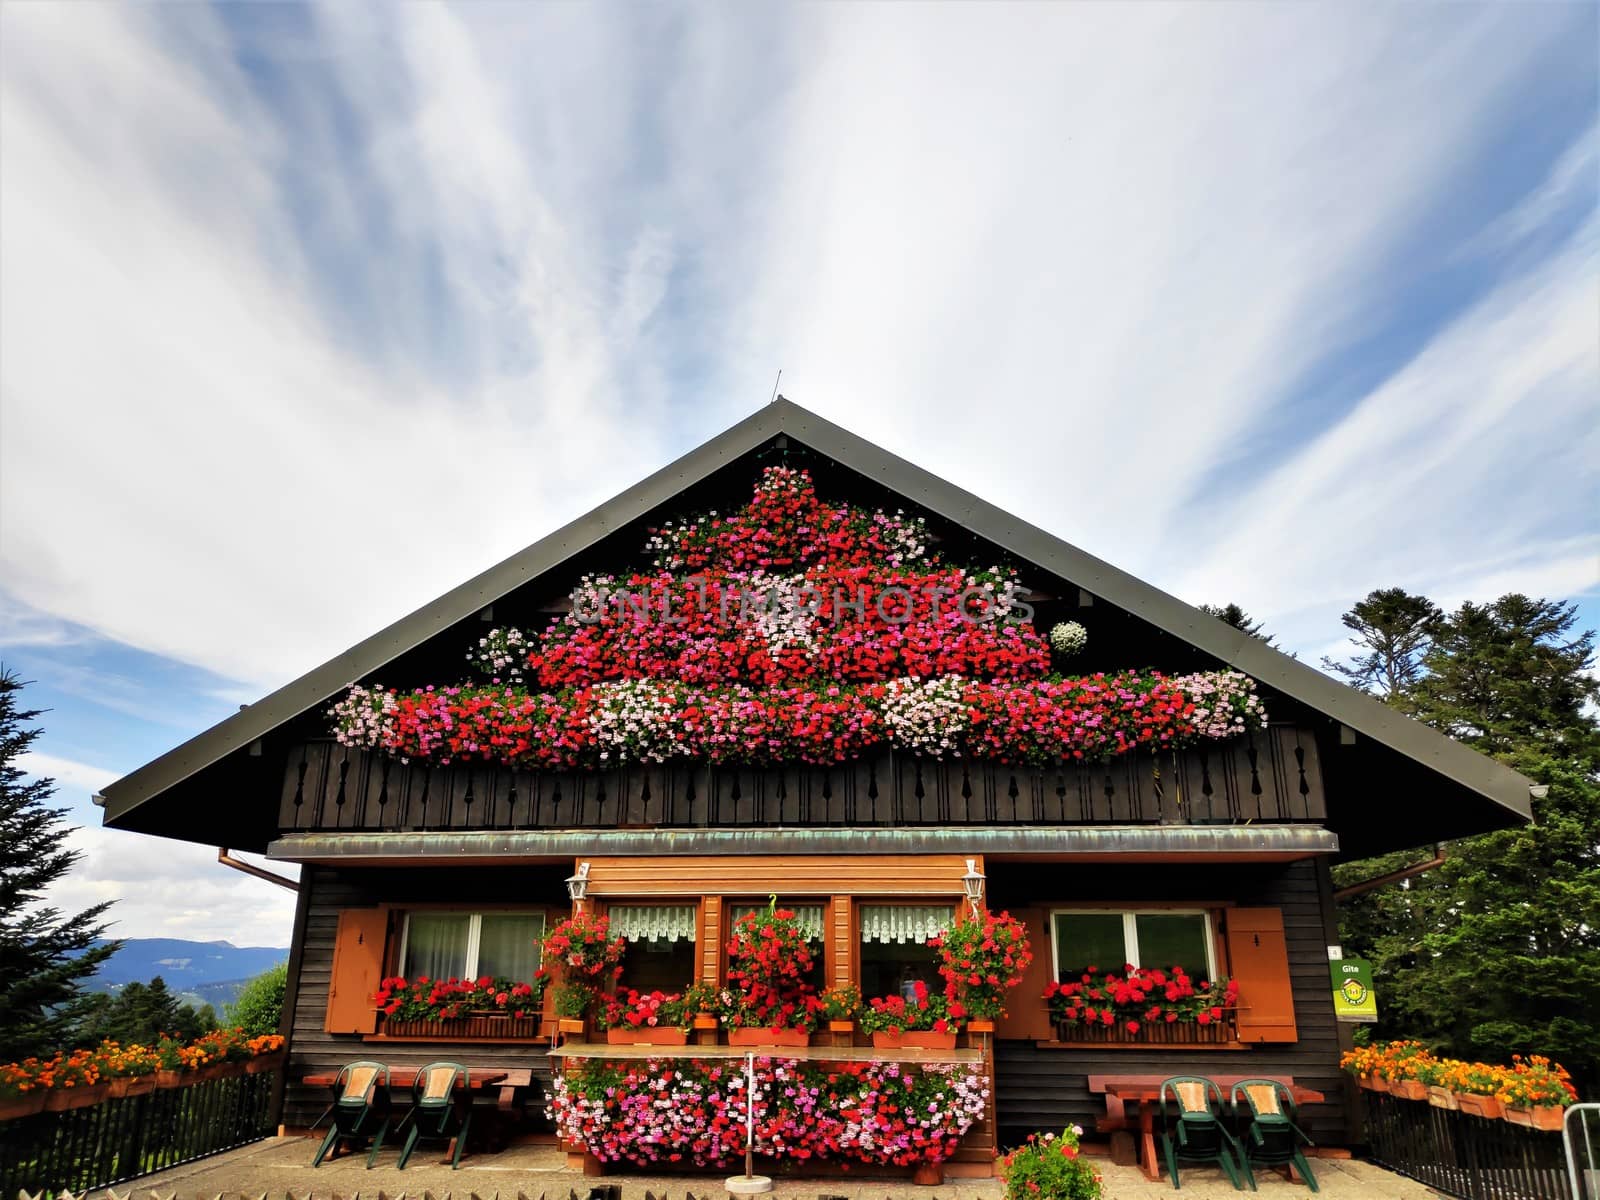 Wooden house with Geranium flowers and interesting cloud formation spotted in Sondernach near Schnepfenried by pisces2386